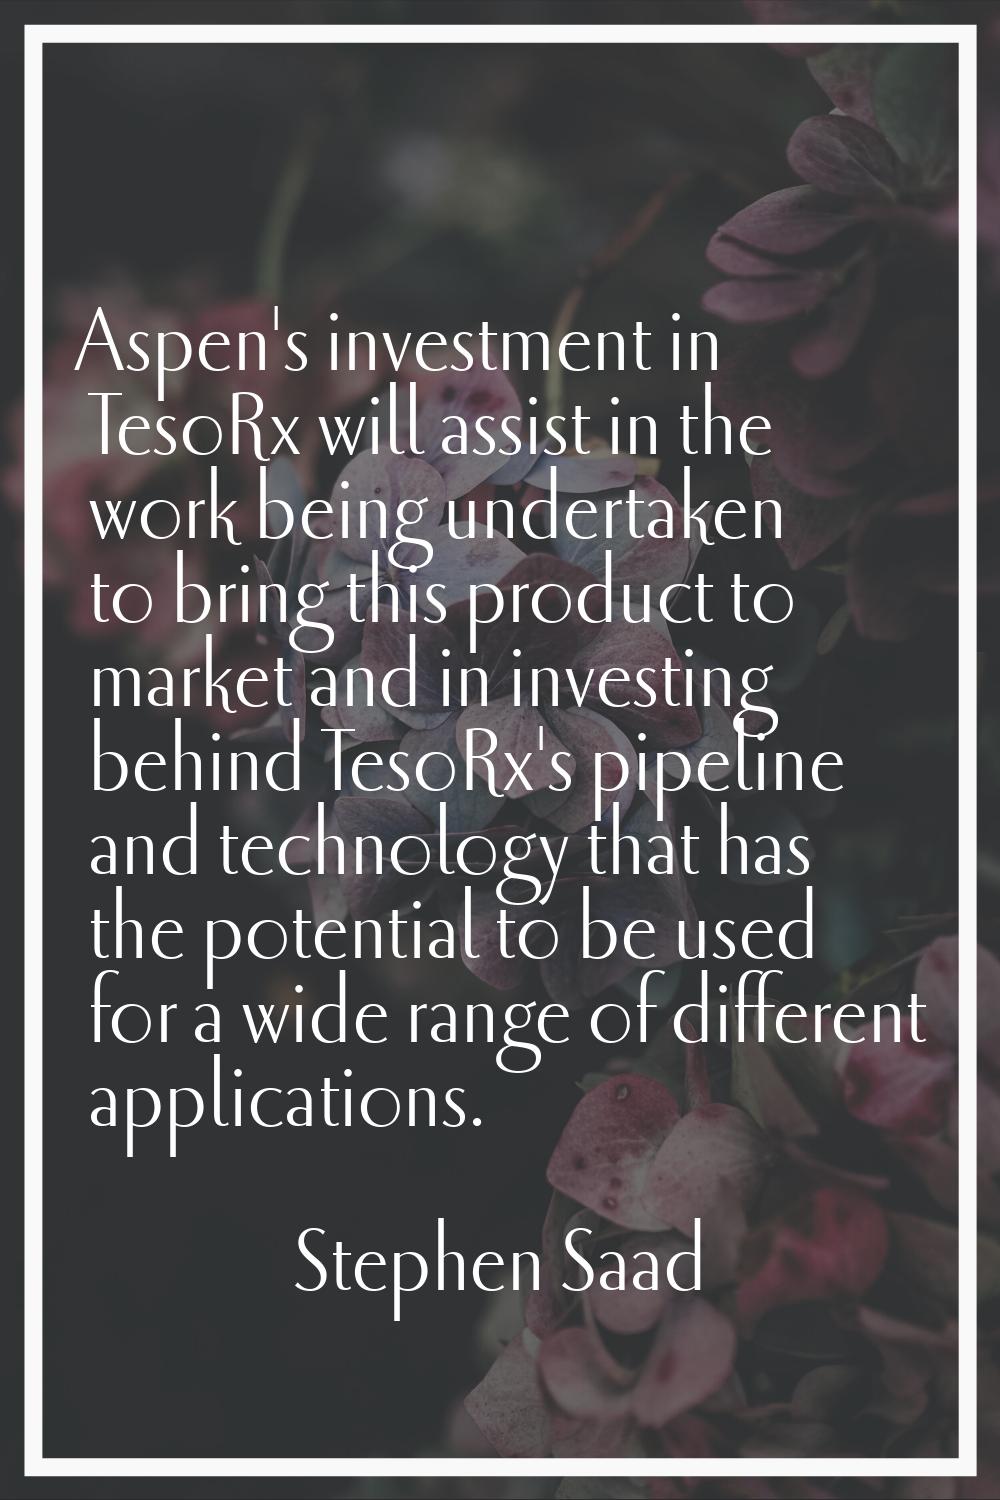 Aspen's investment in TesoRx will assist in the work being undertaken to bring this product to mark